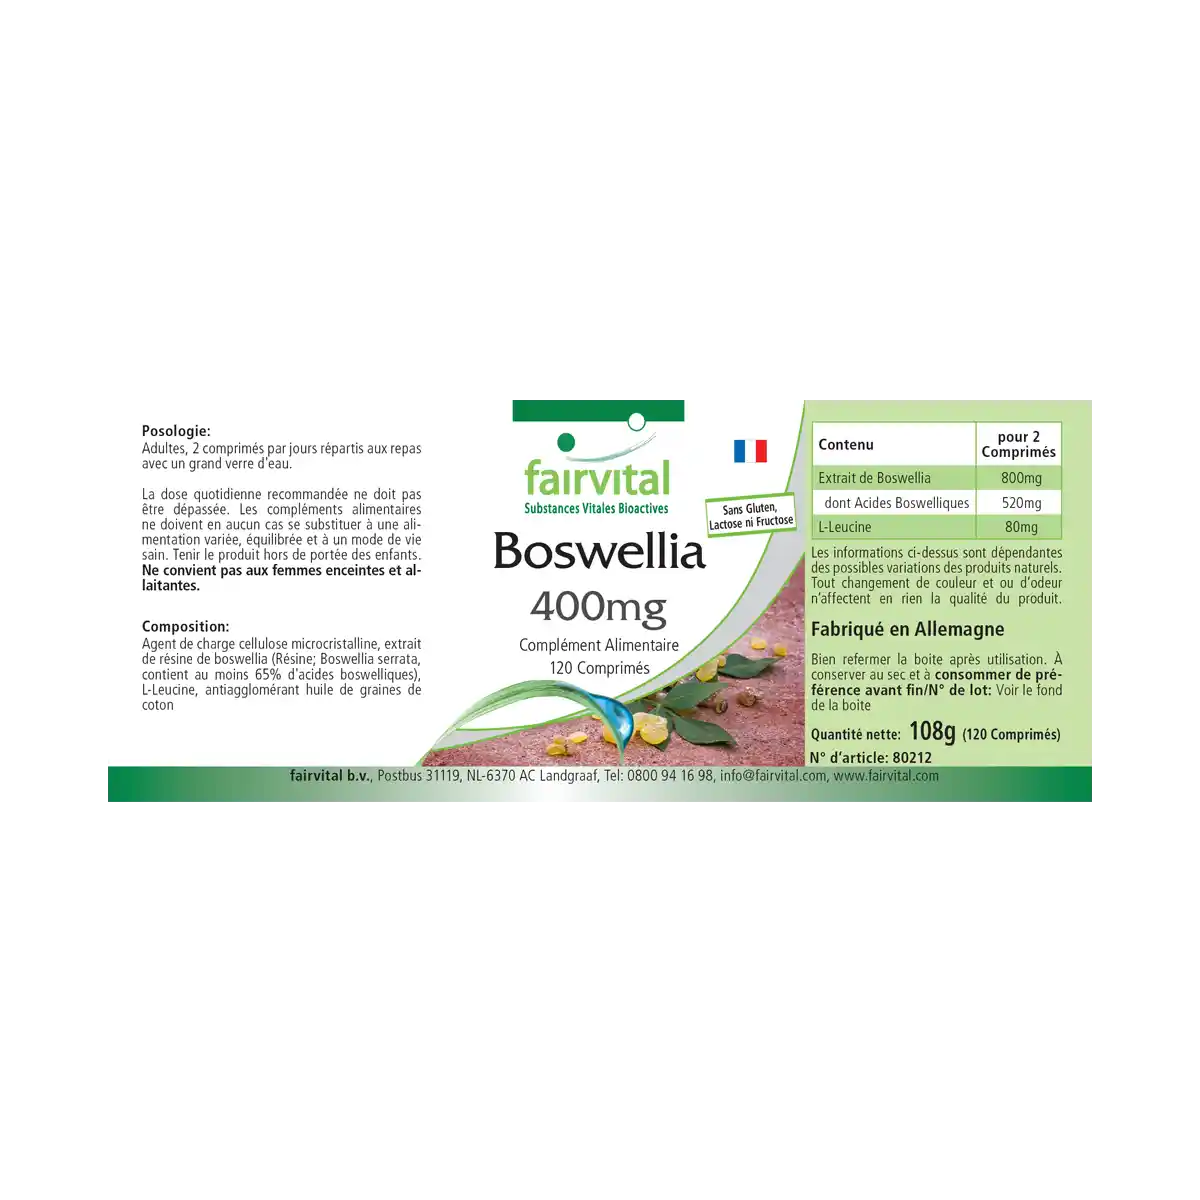 Boswellia frankincense 400mg – 120 tablets